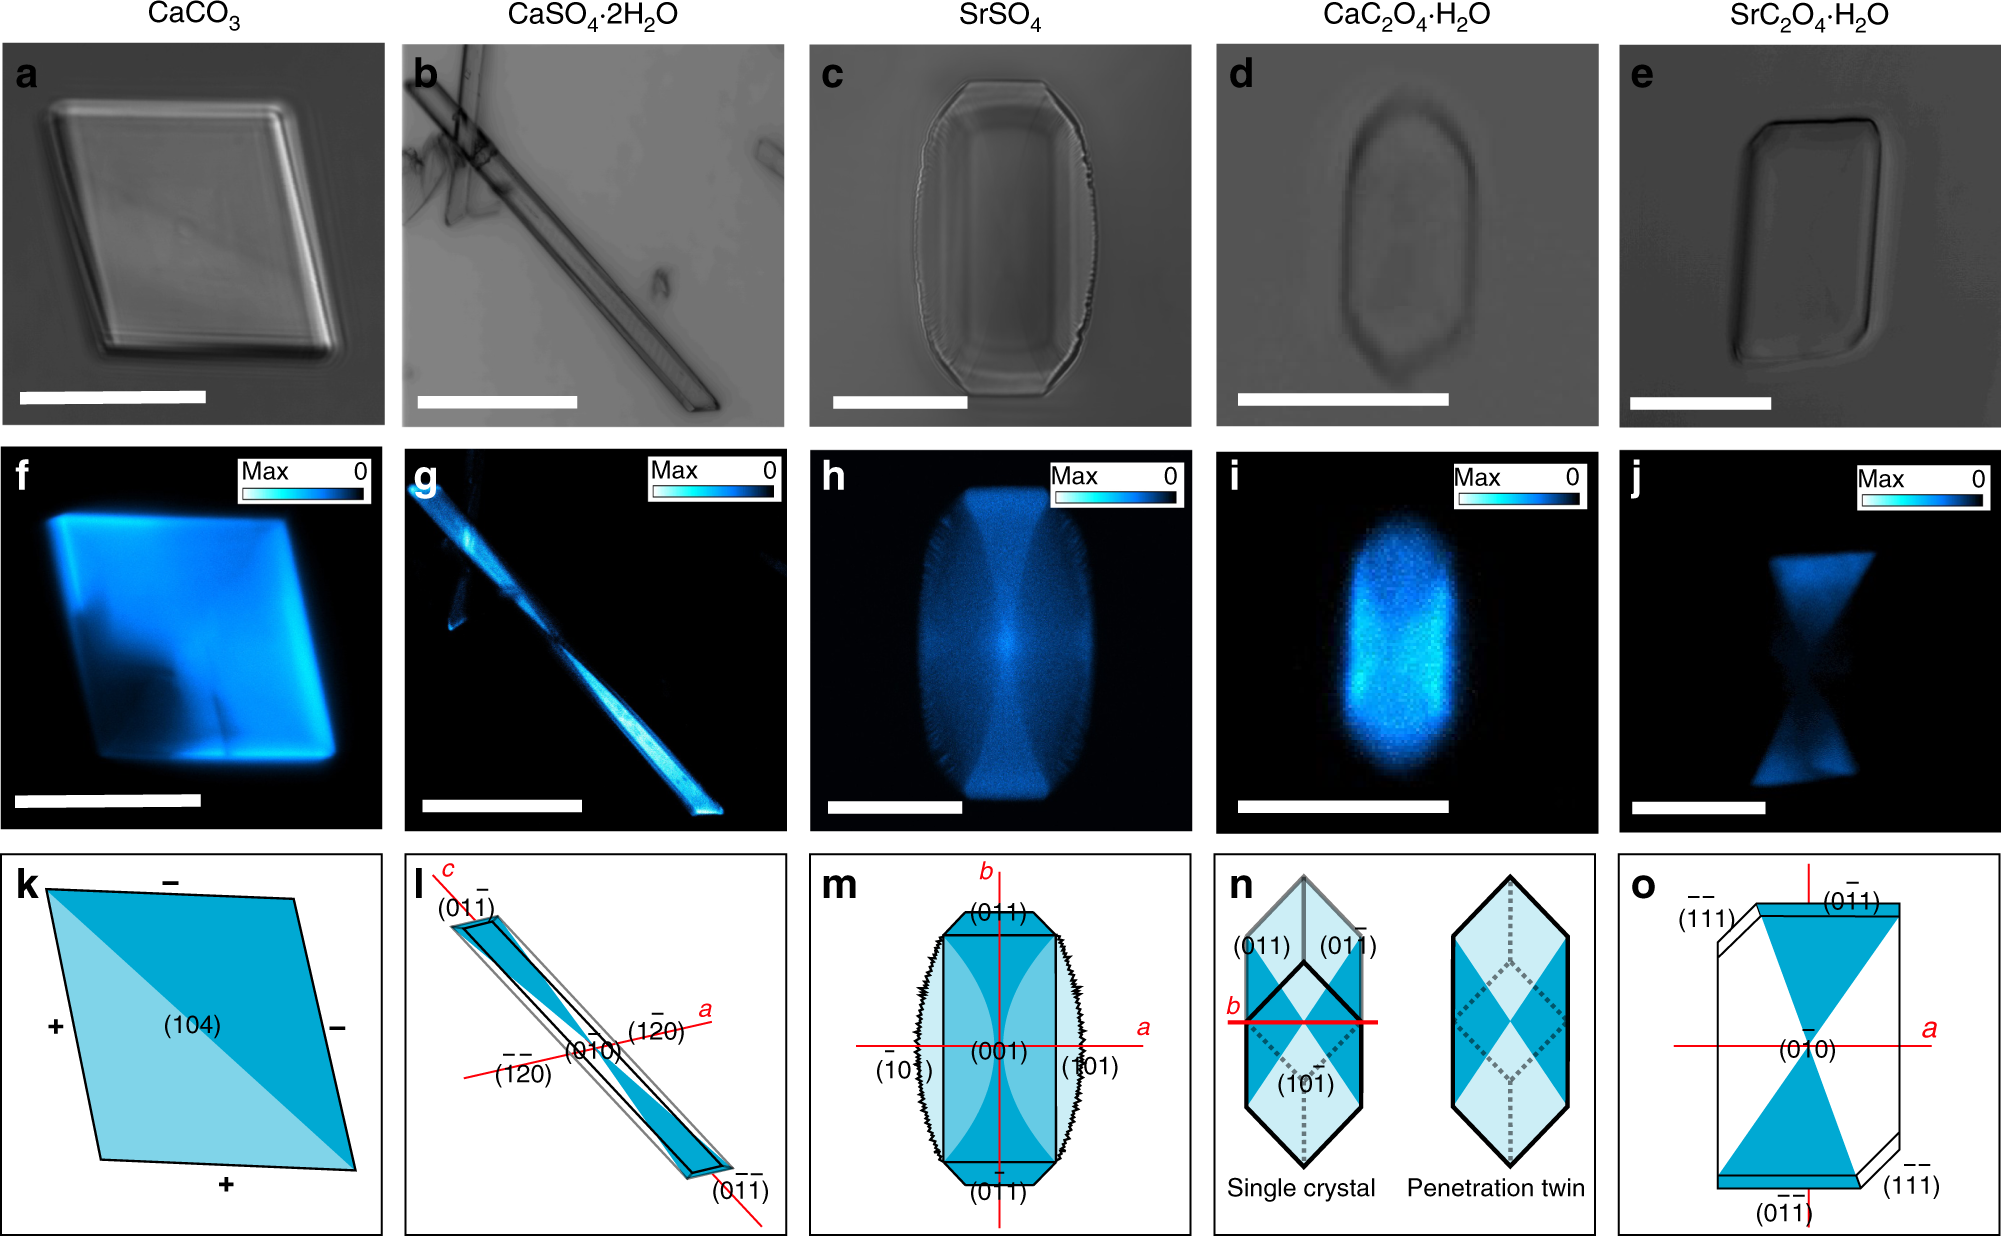 Comparison of fluorescence stability as influenced by temperature